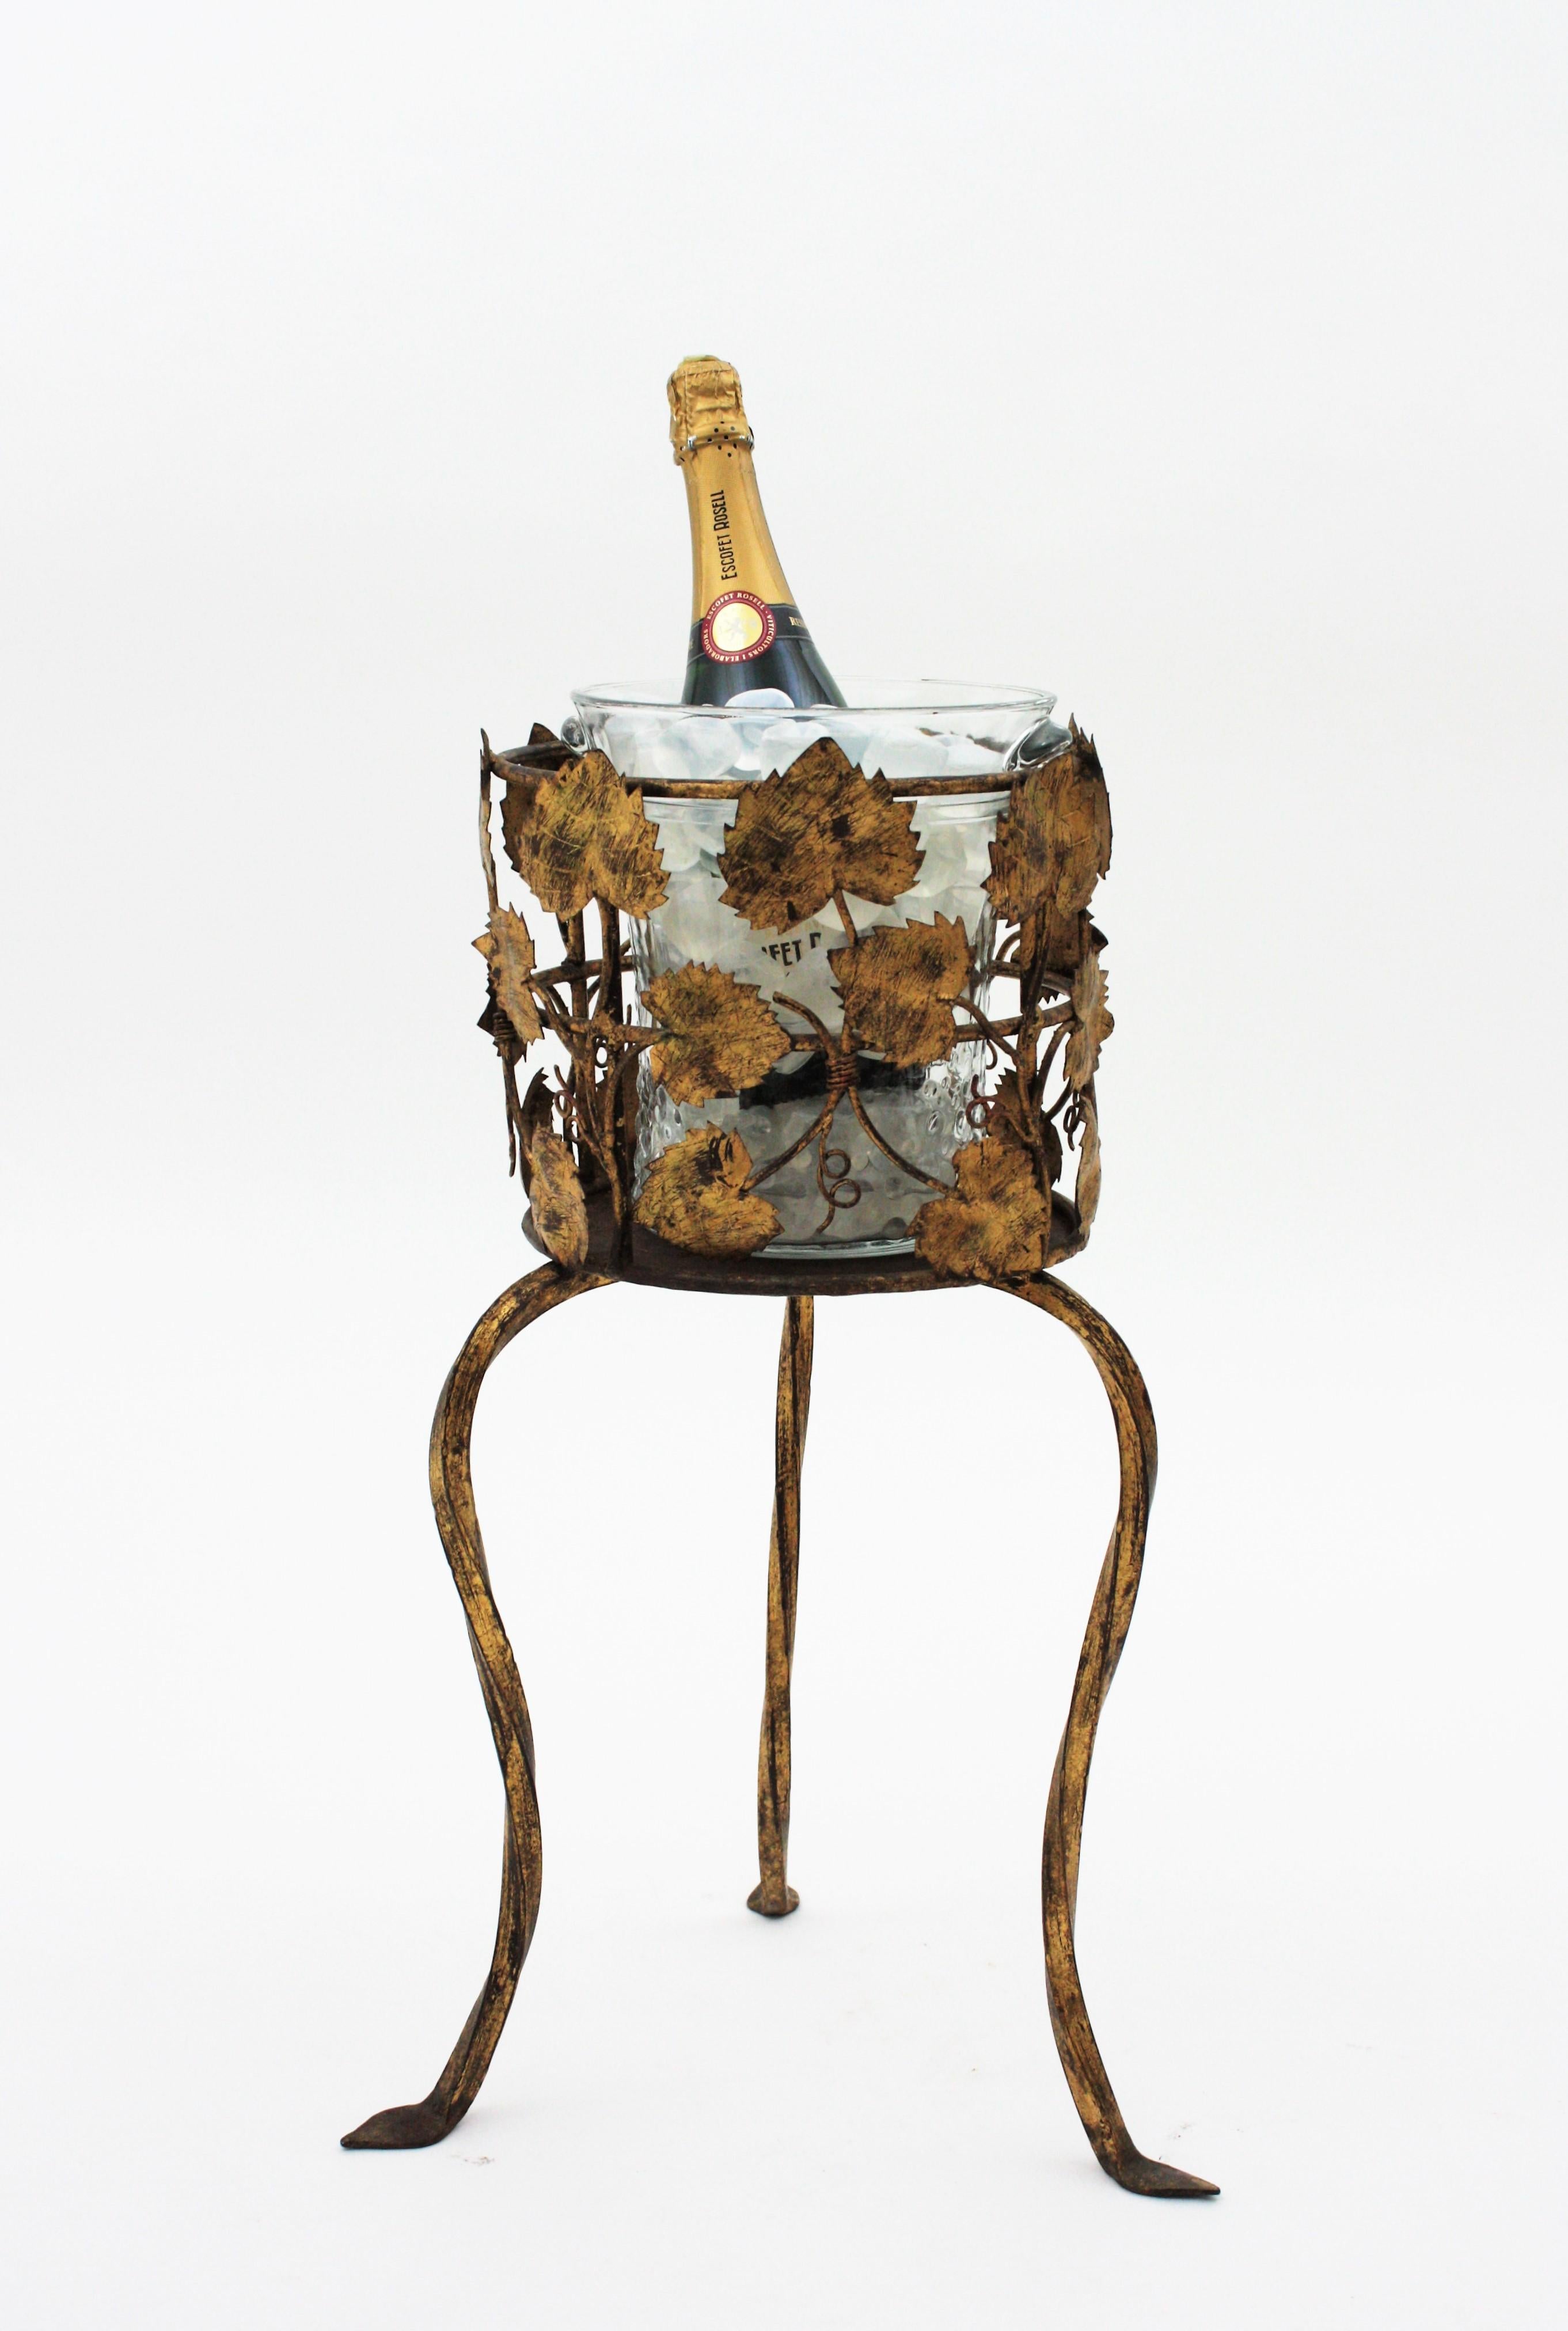 One of a kind foliage gilt iron tripod stand with pressed glass ice bucket, Spain, 1940s
This iron ice bucket serving stand is all made by hand. The handwrought iron stand has a leafed richly adorned top showing gilt iron vine leaves thorough. It